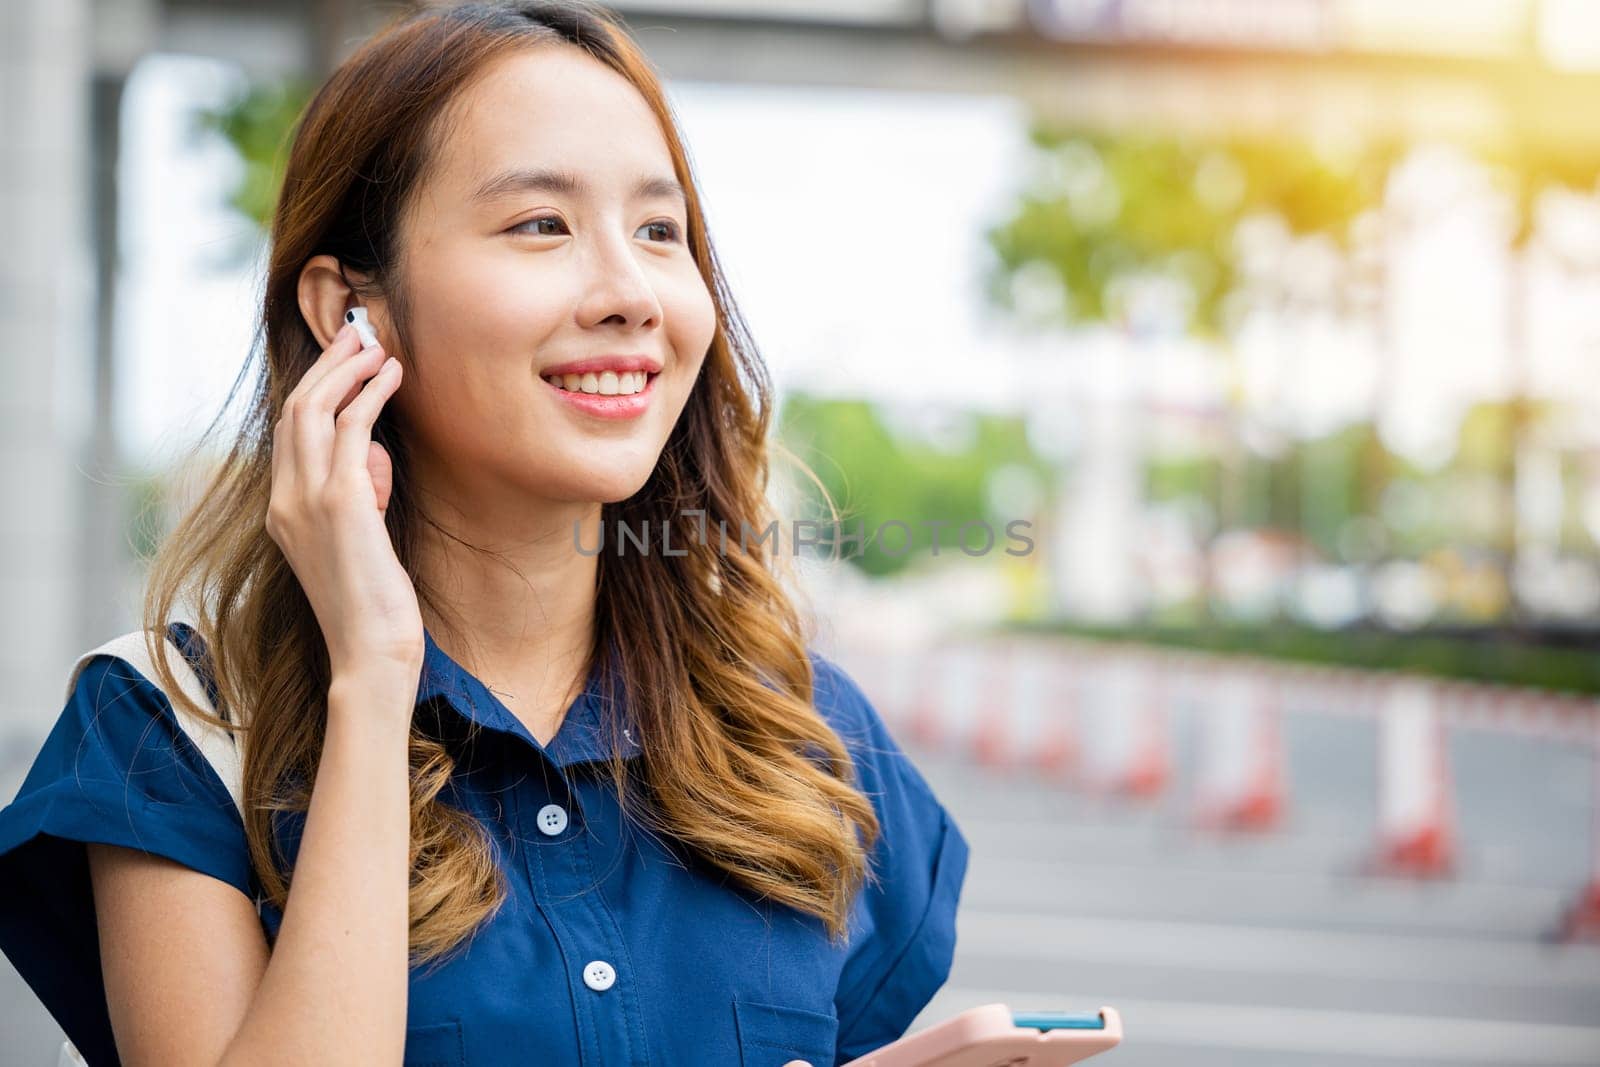 Smiling Asian girl using earbuds and smartphone for virtual chat and social media. This is a perfect portrait of a young person's lifestyle.